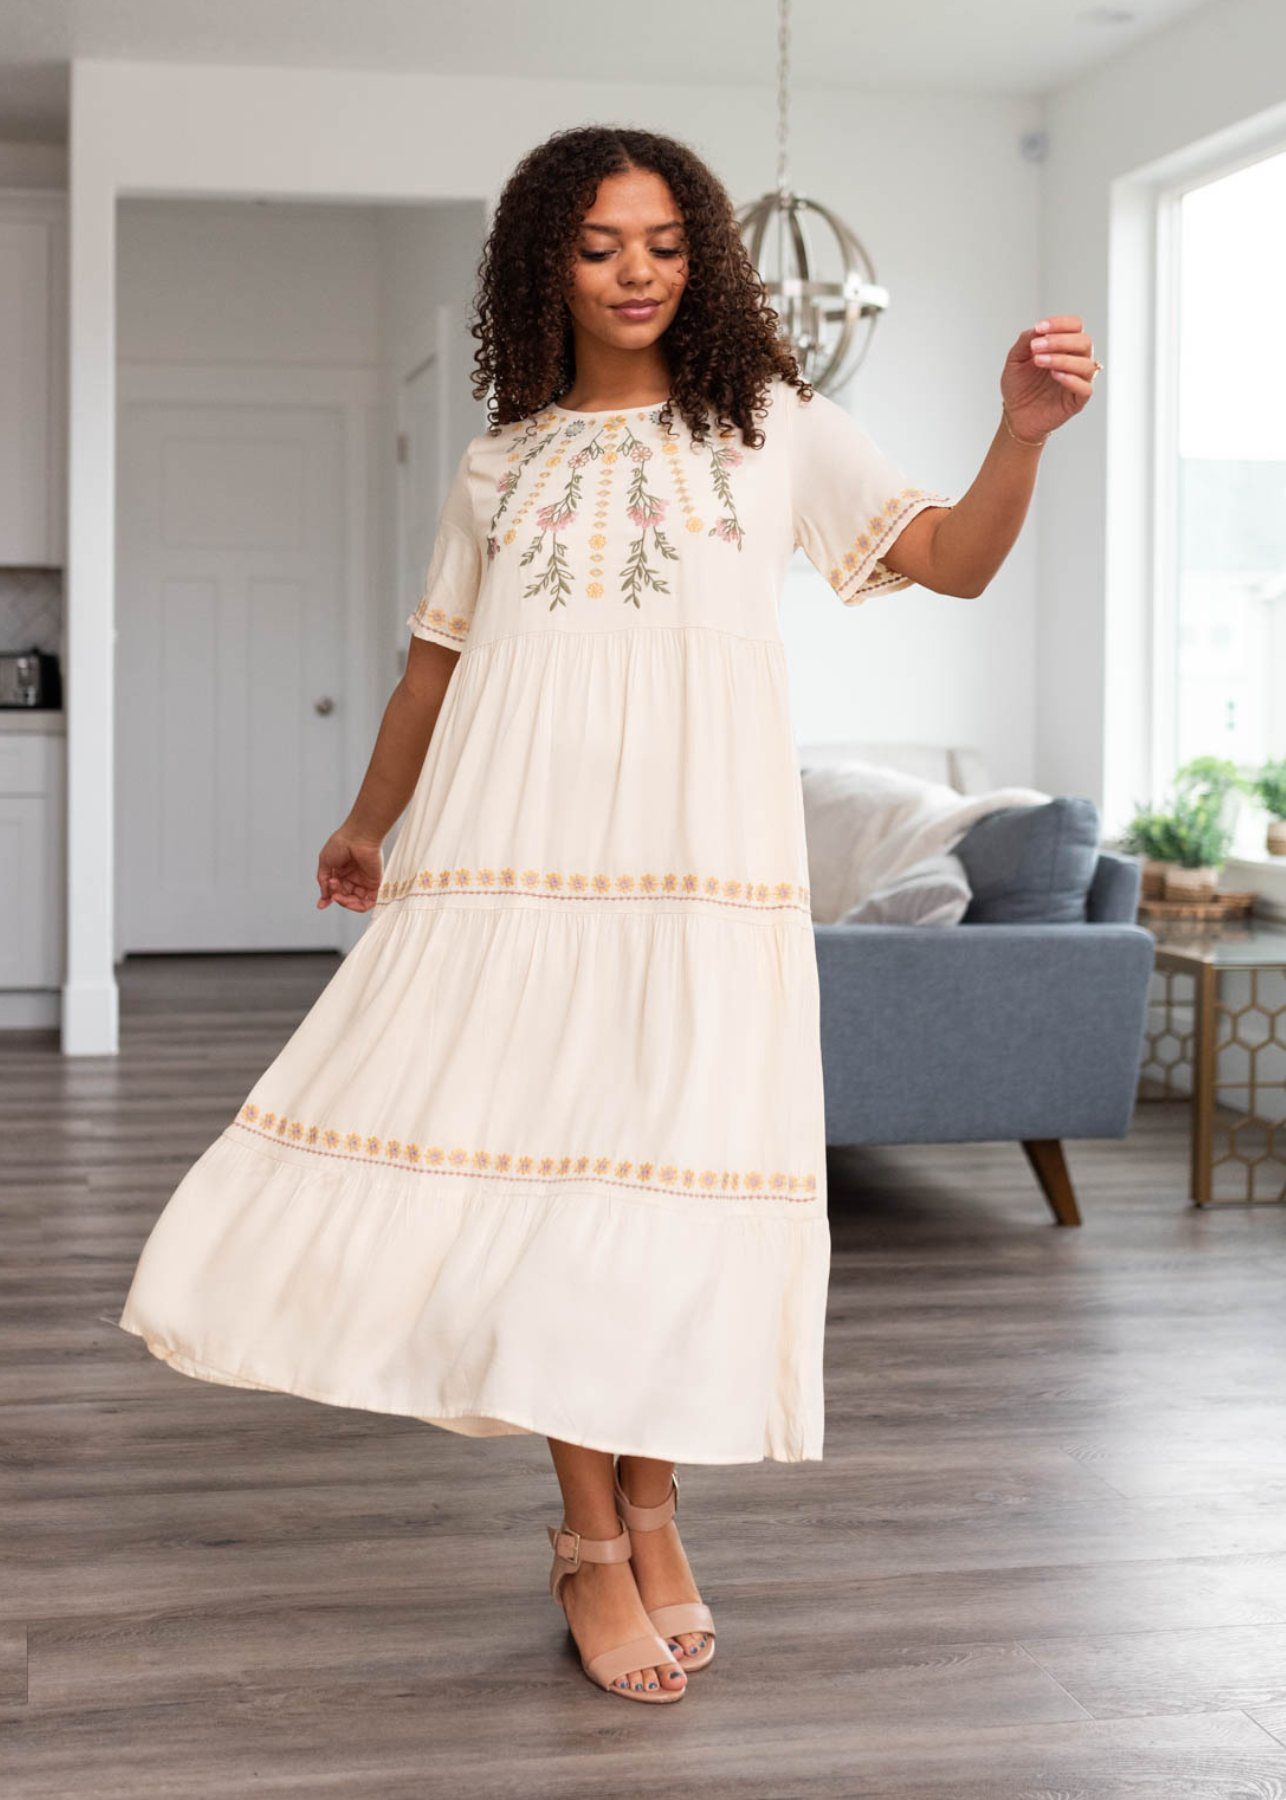 Cream dress with embroidery on the top